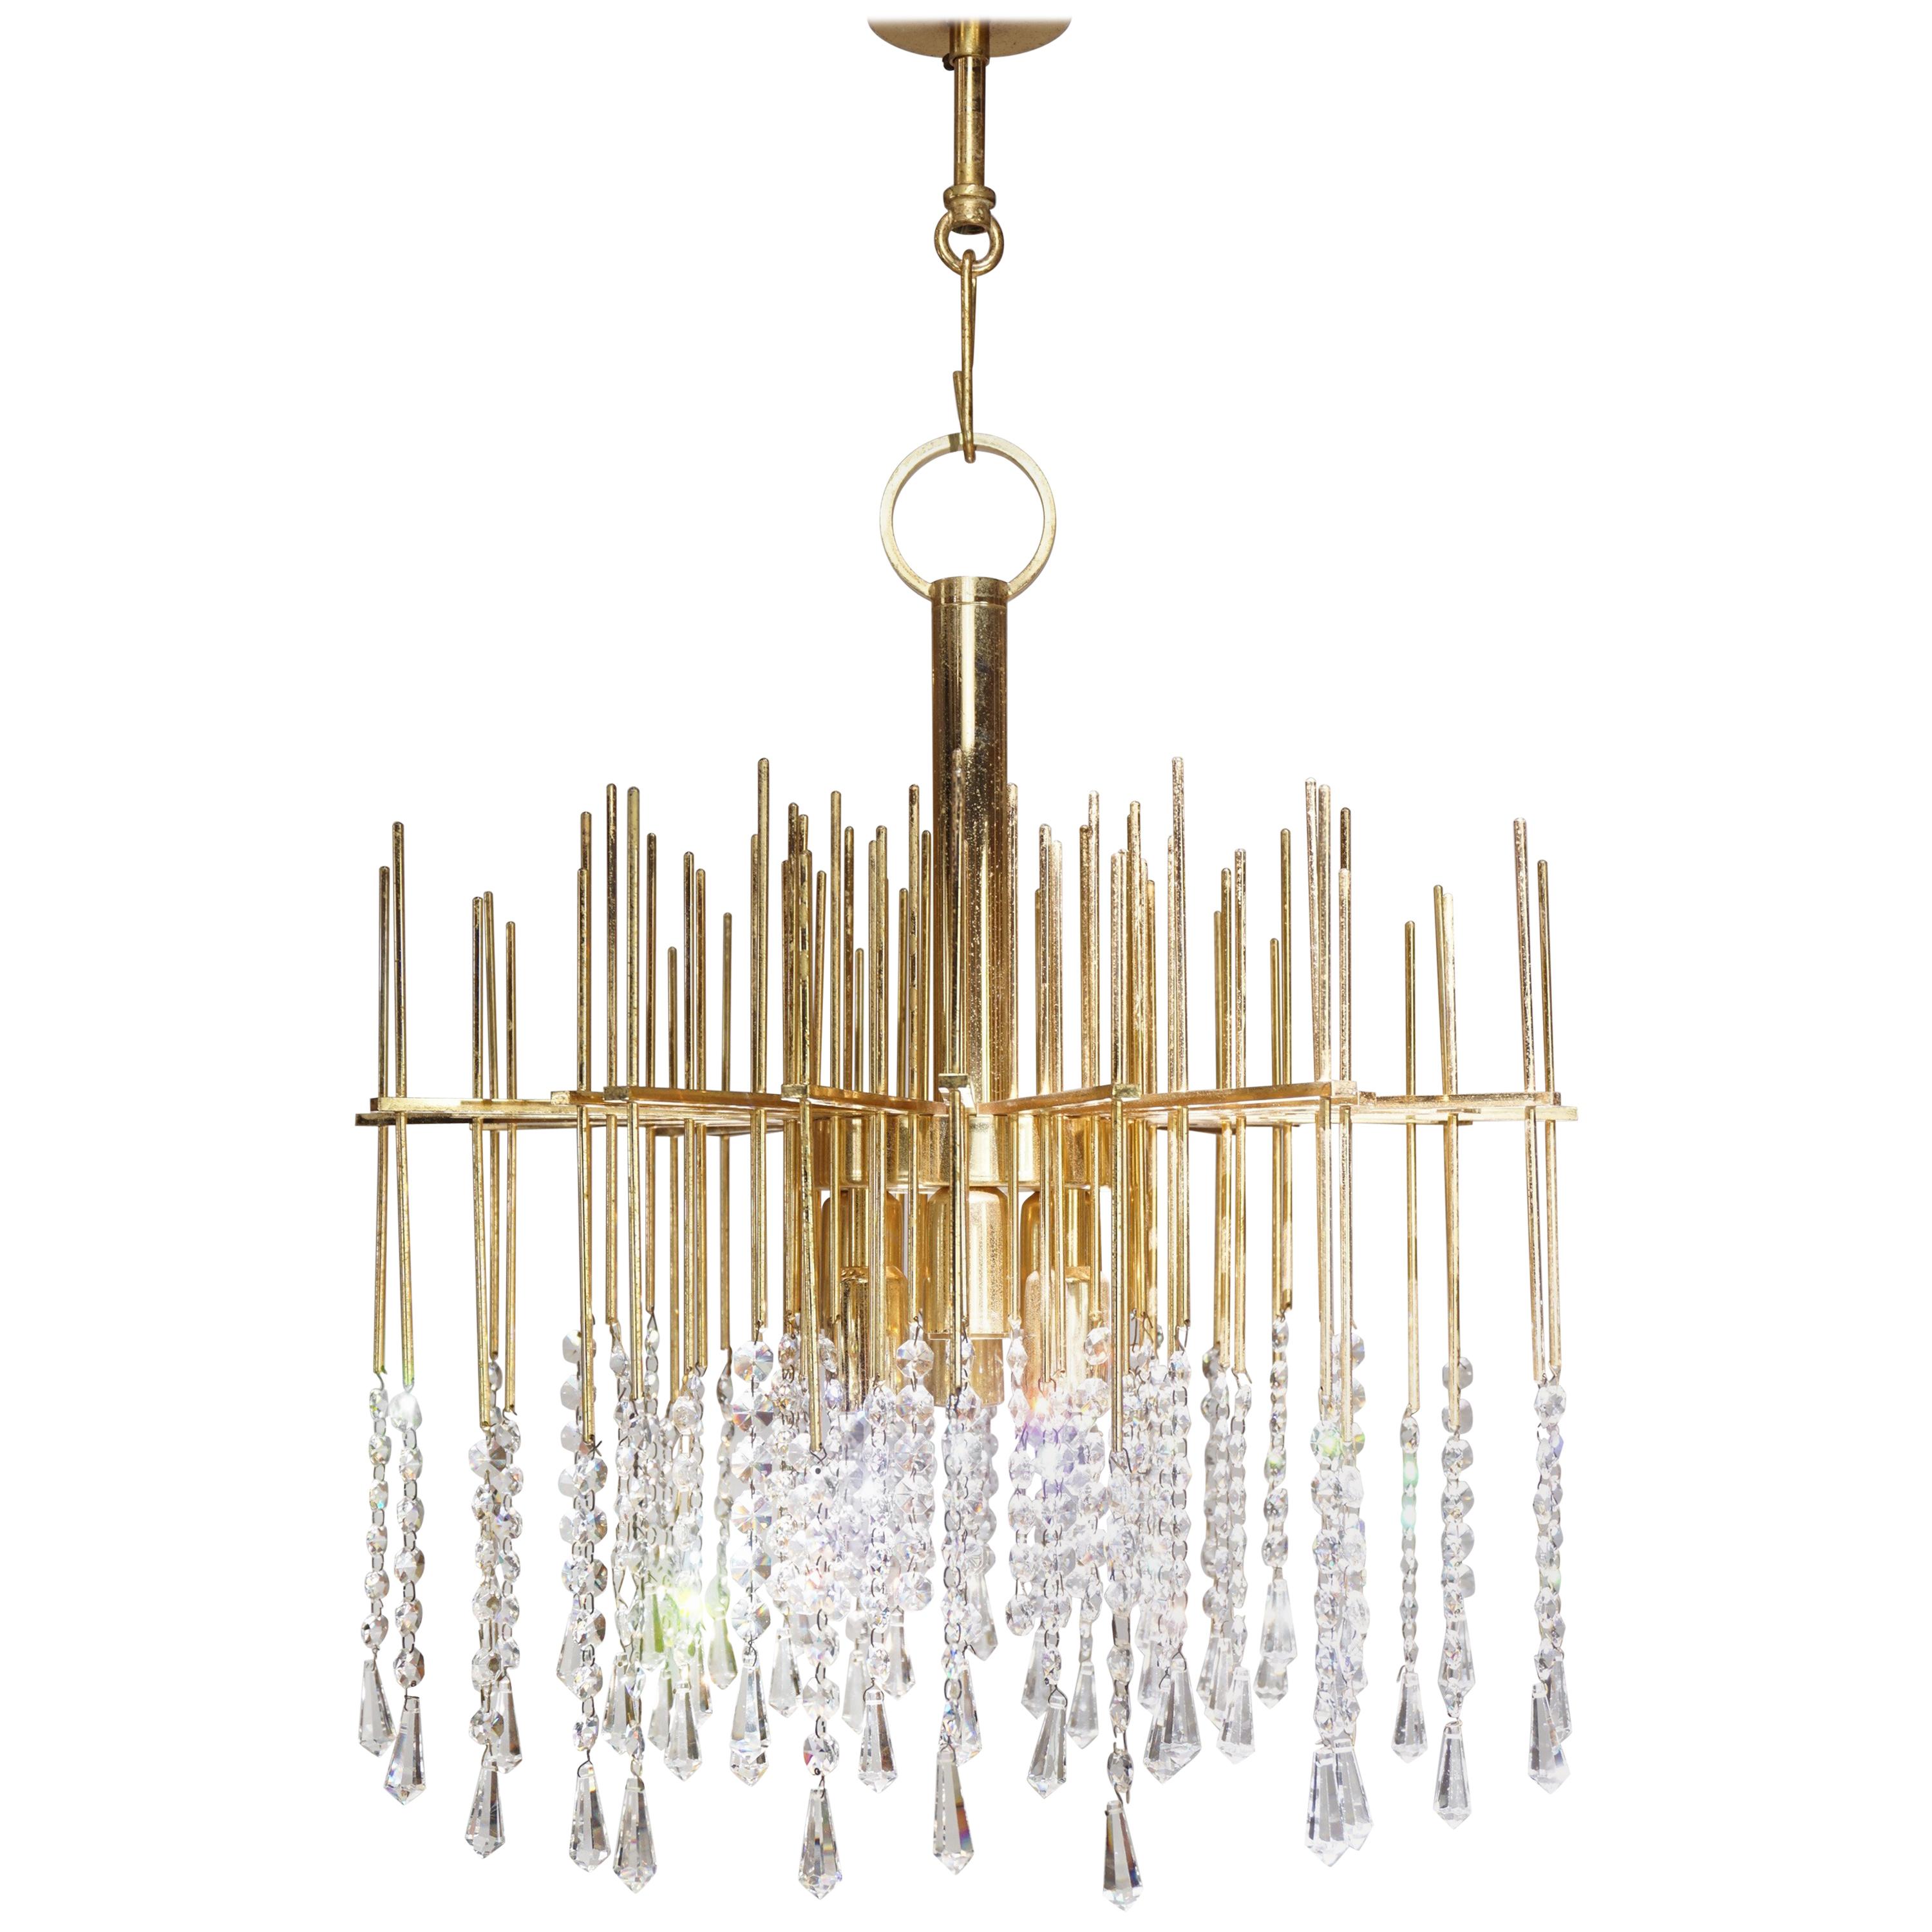 Brass and Cristal Chandelier Hollywood Regency Style